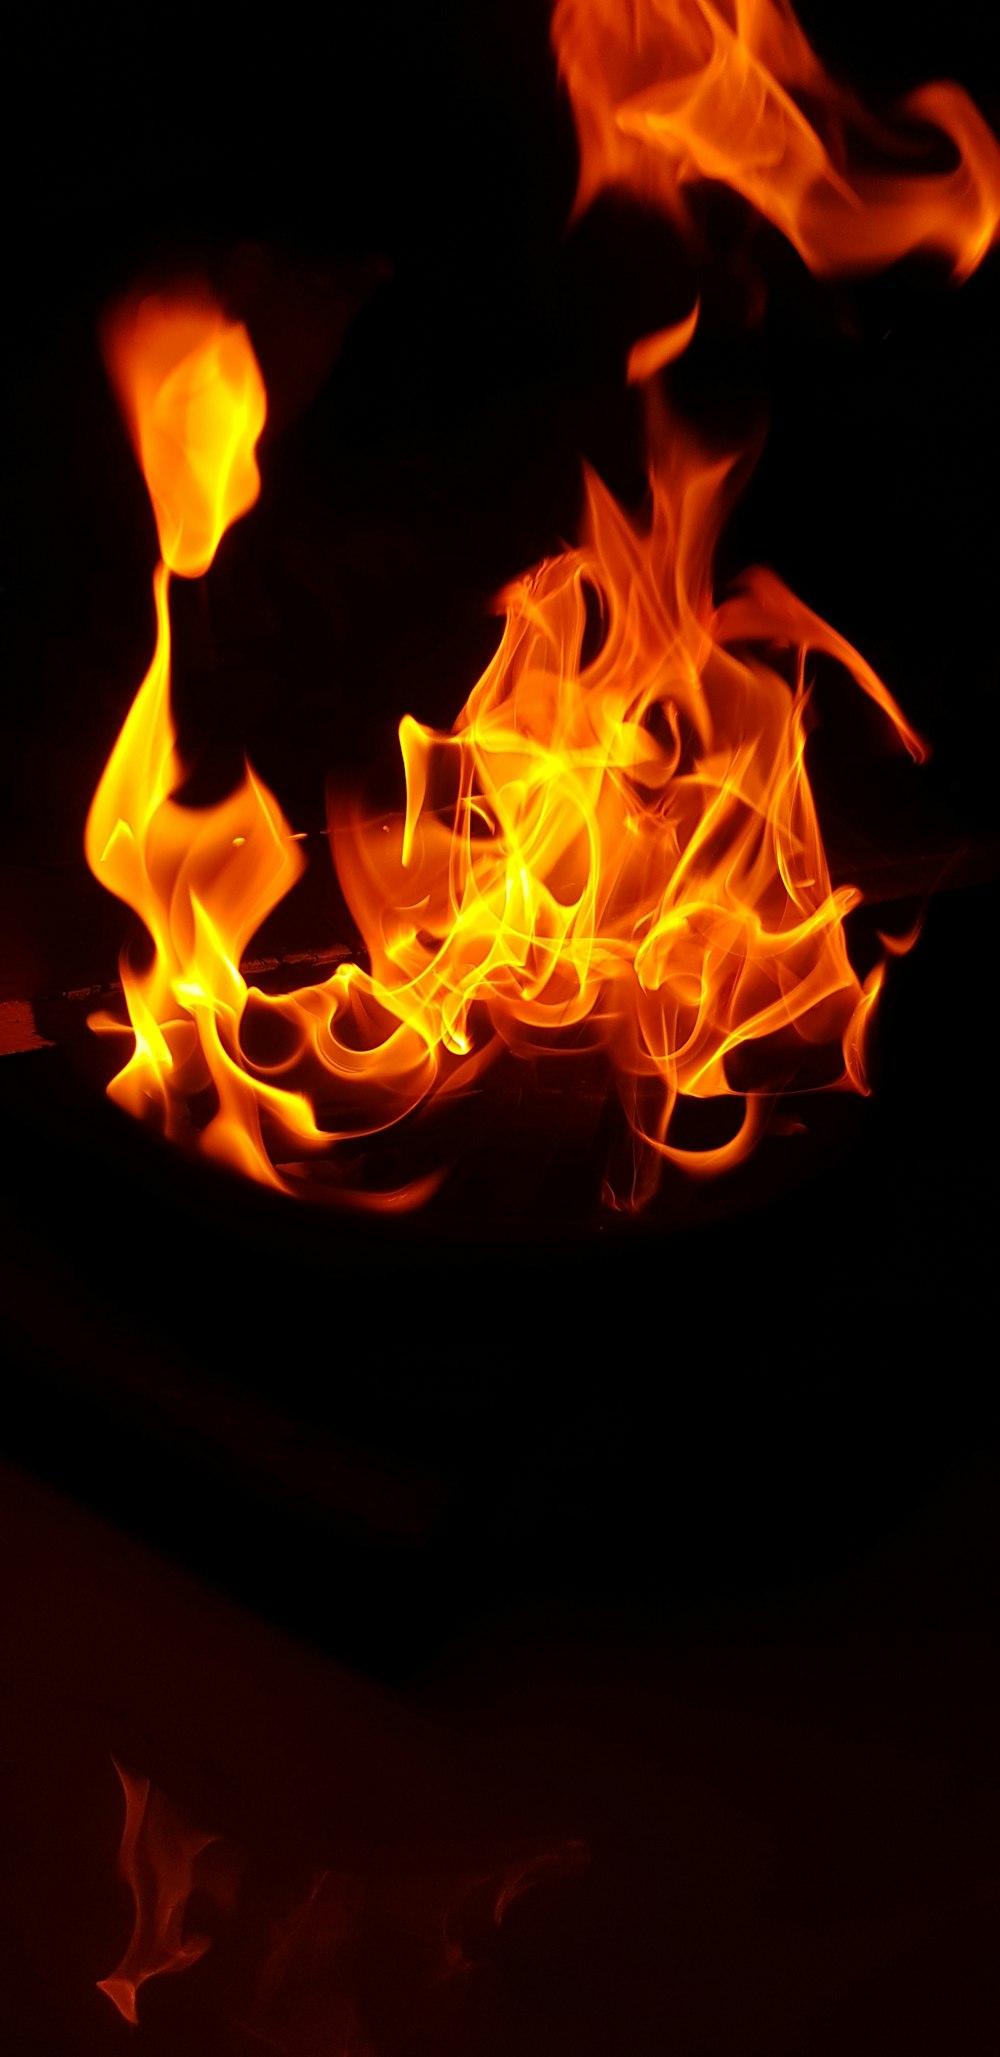 close-up photo of flame